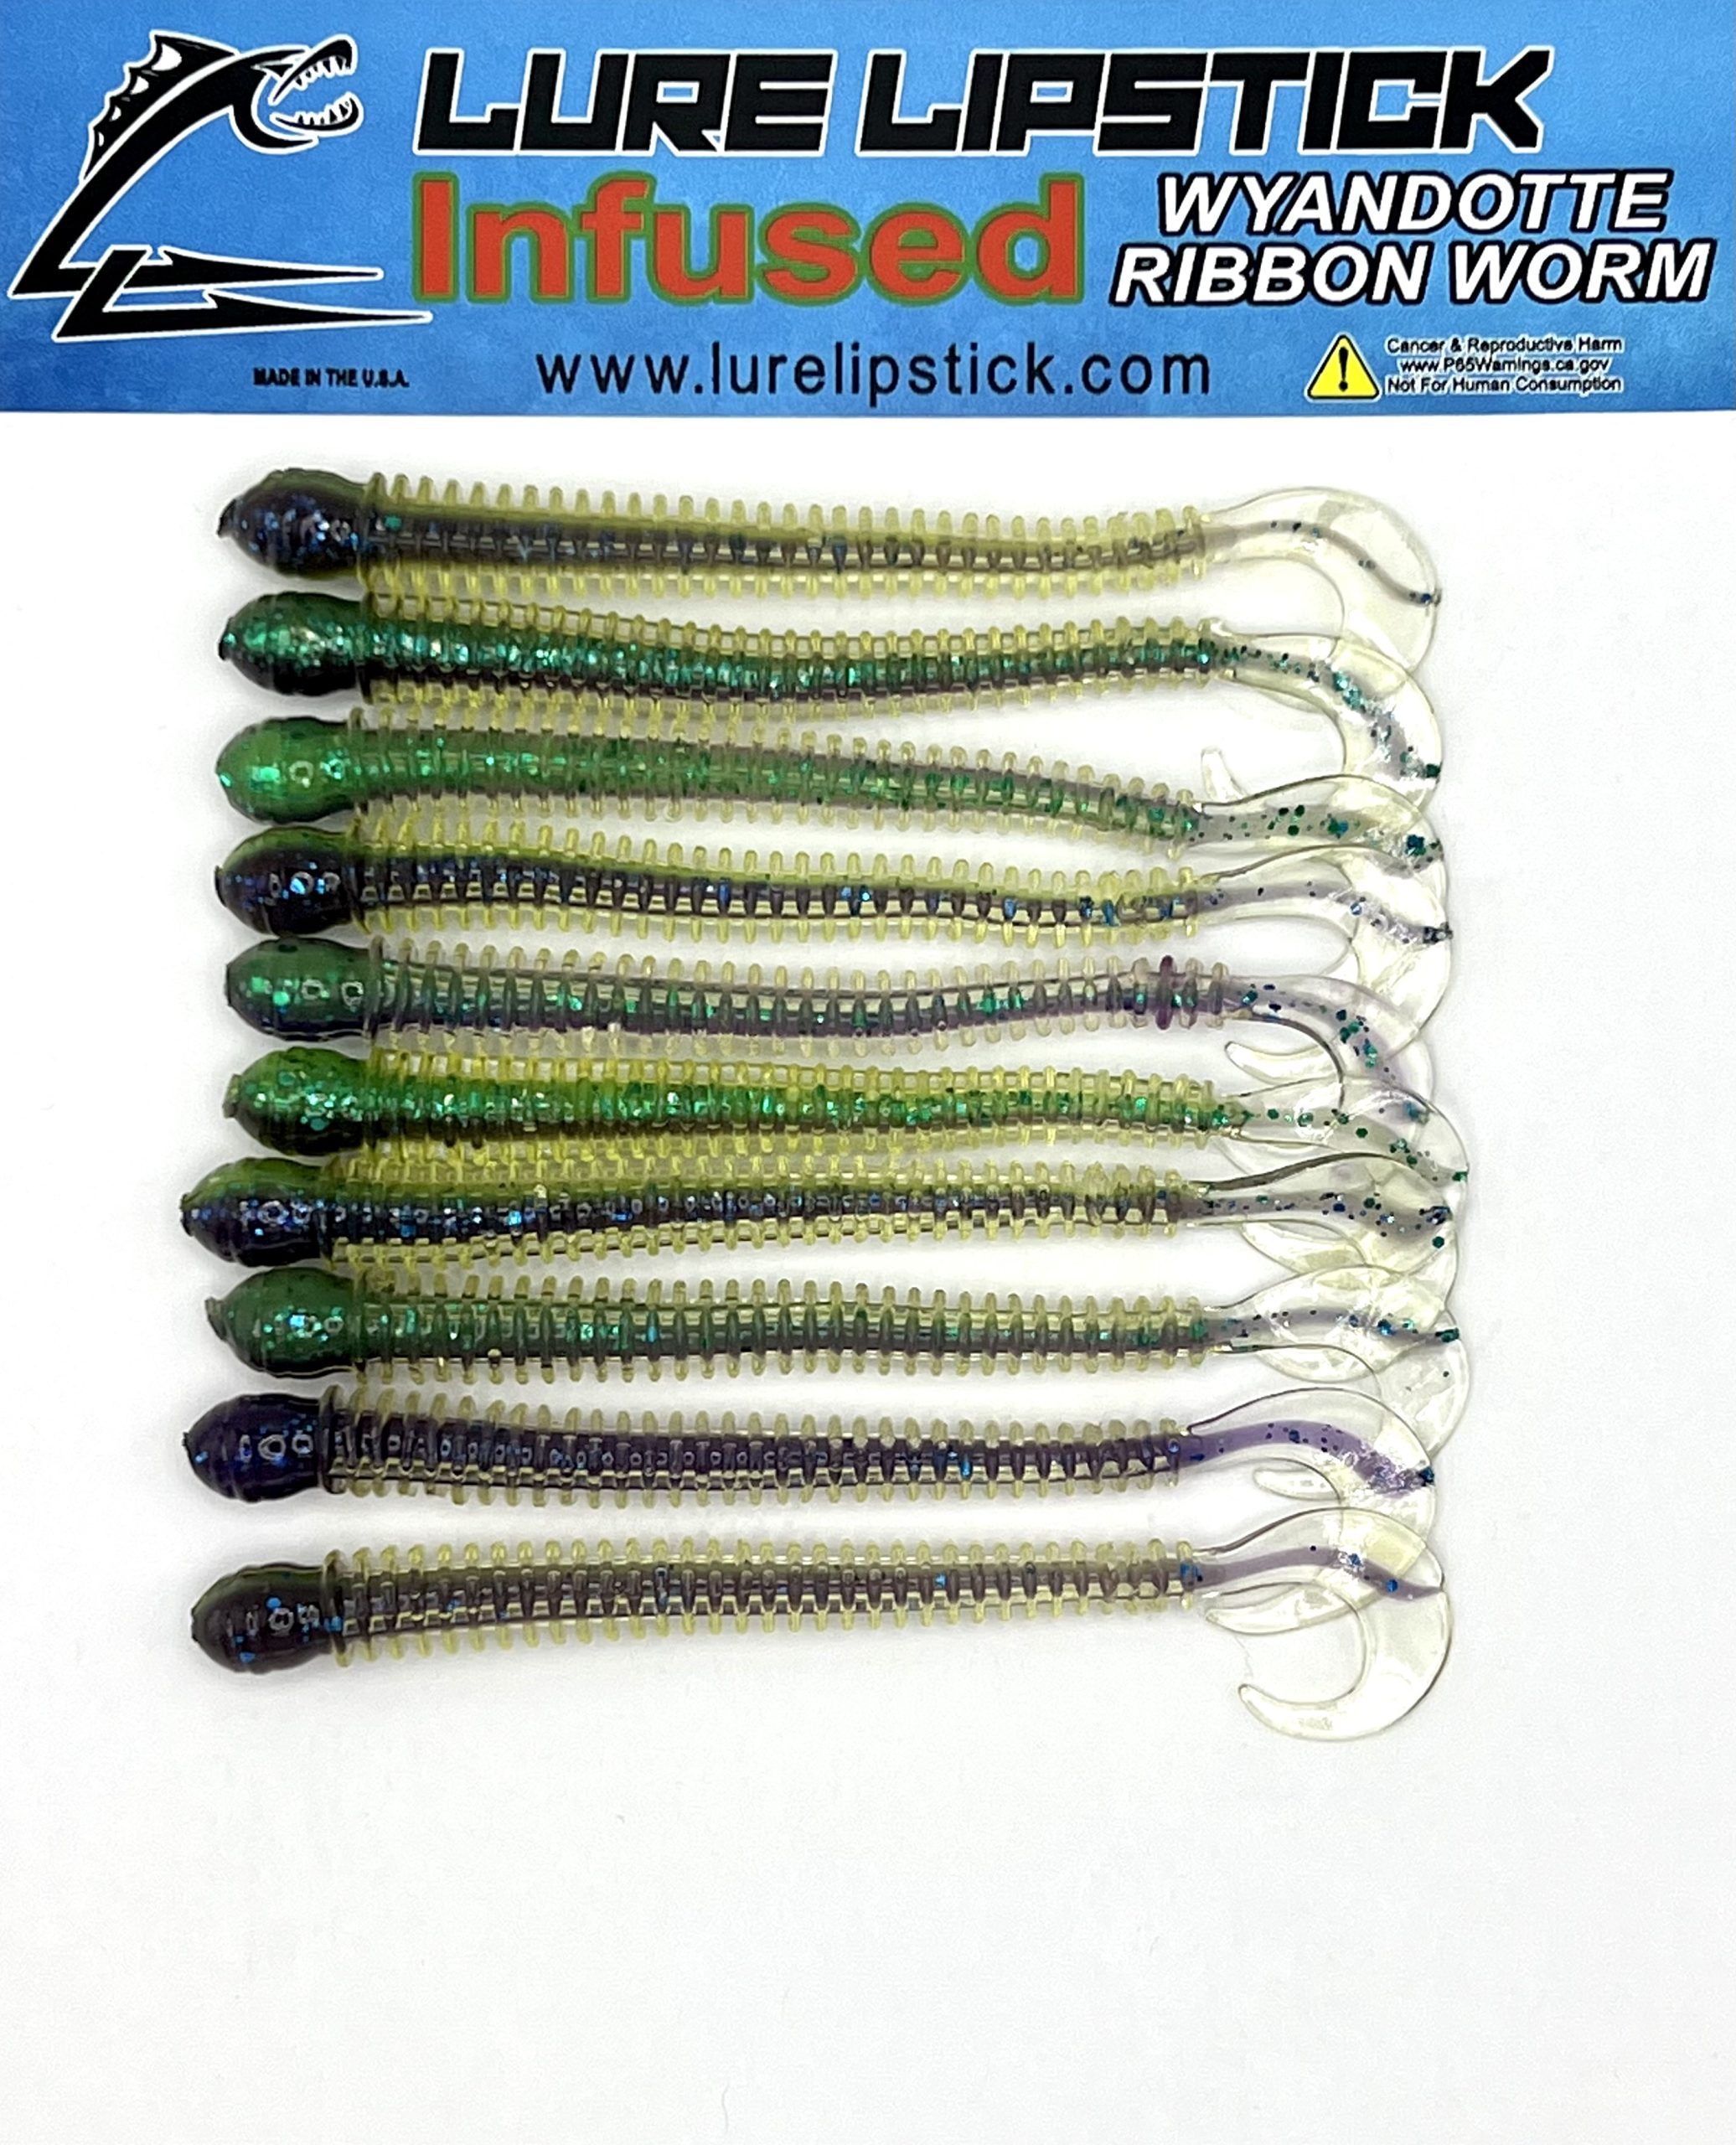 4 Inch 10 Pack Infused Custom Wyandotte Ribbon Worms - Clear Huckleberry